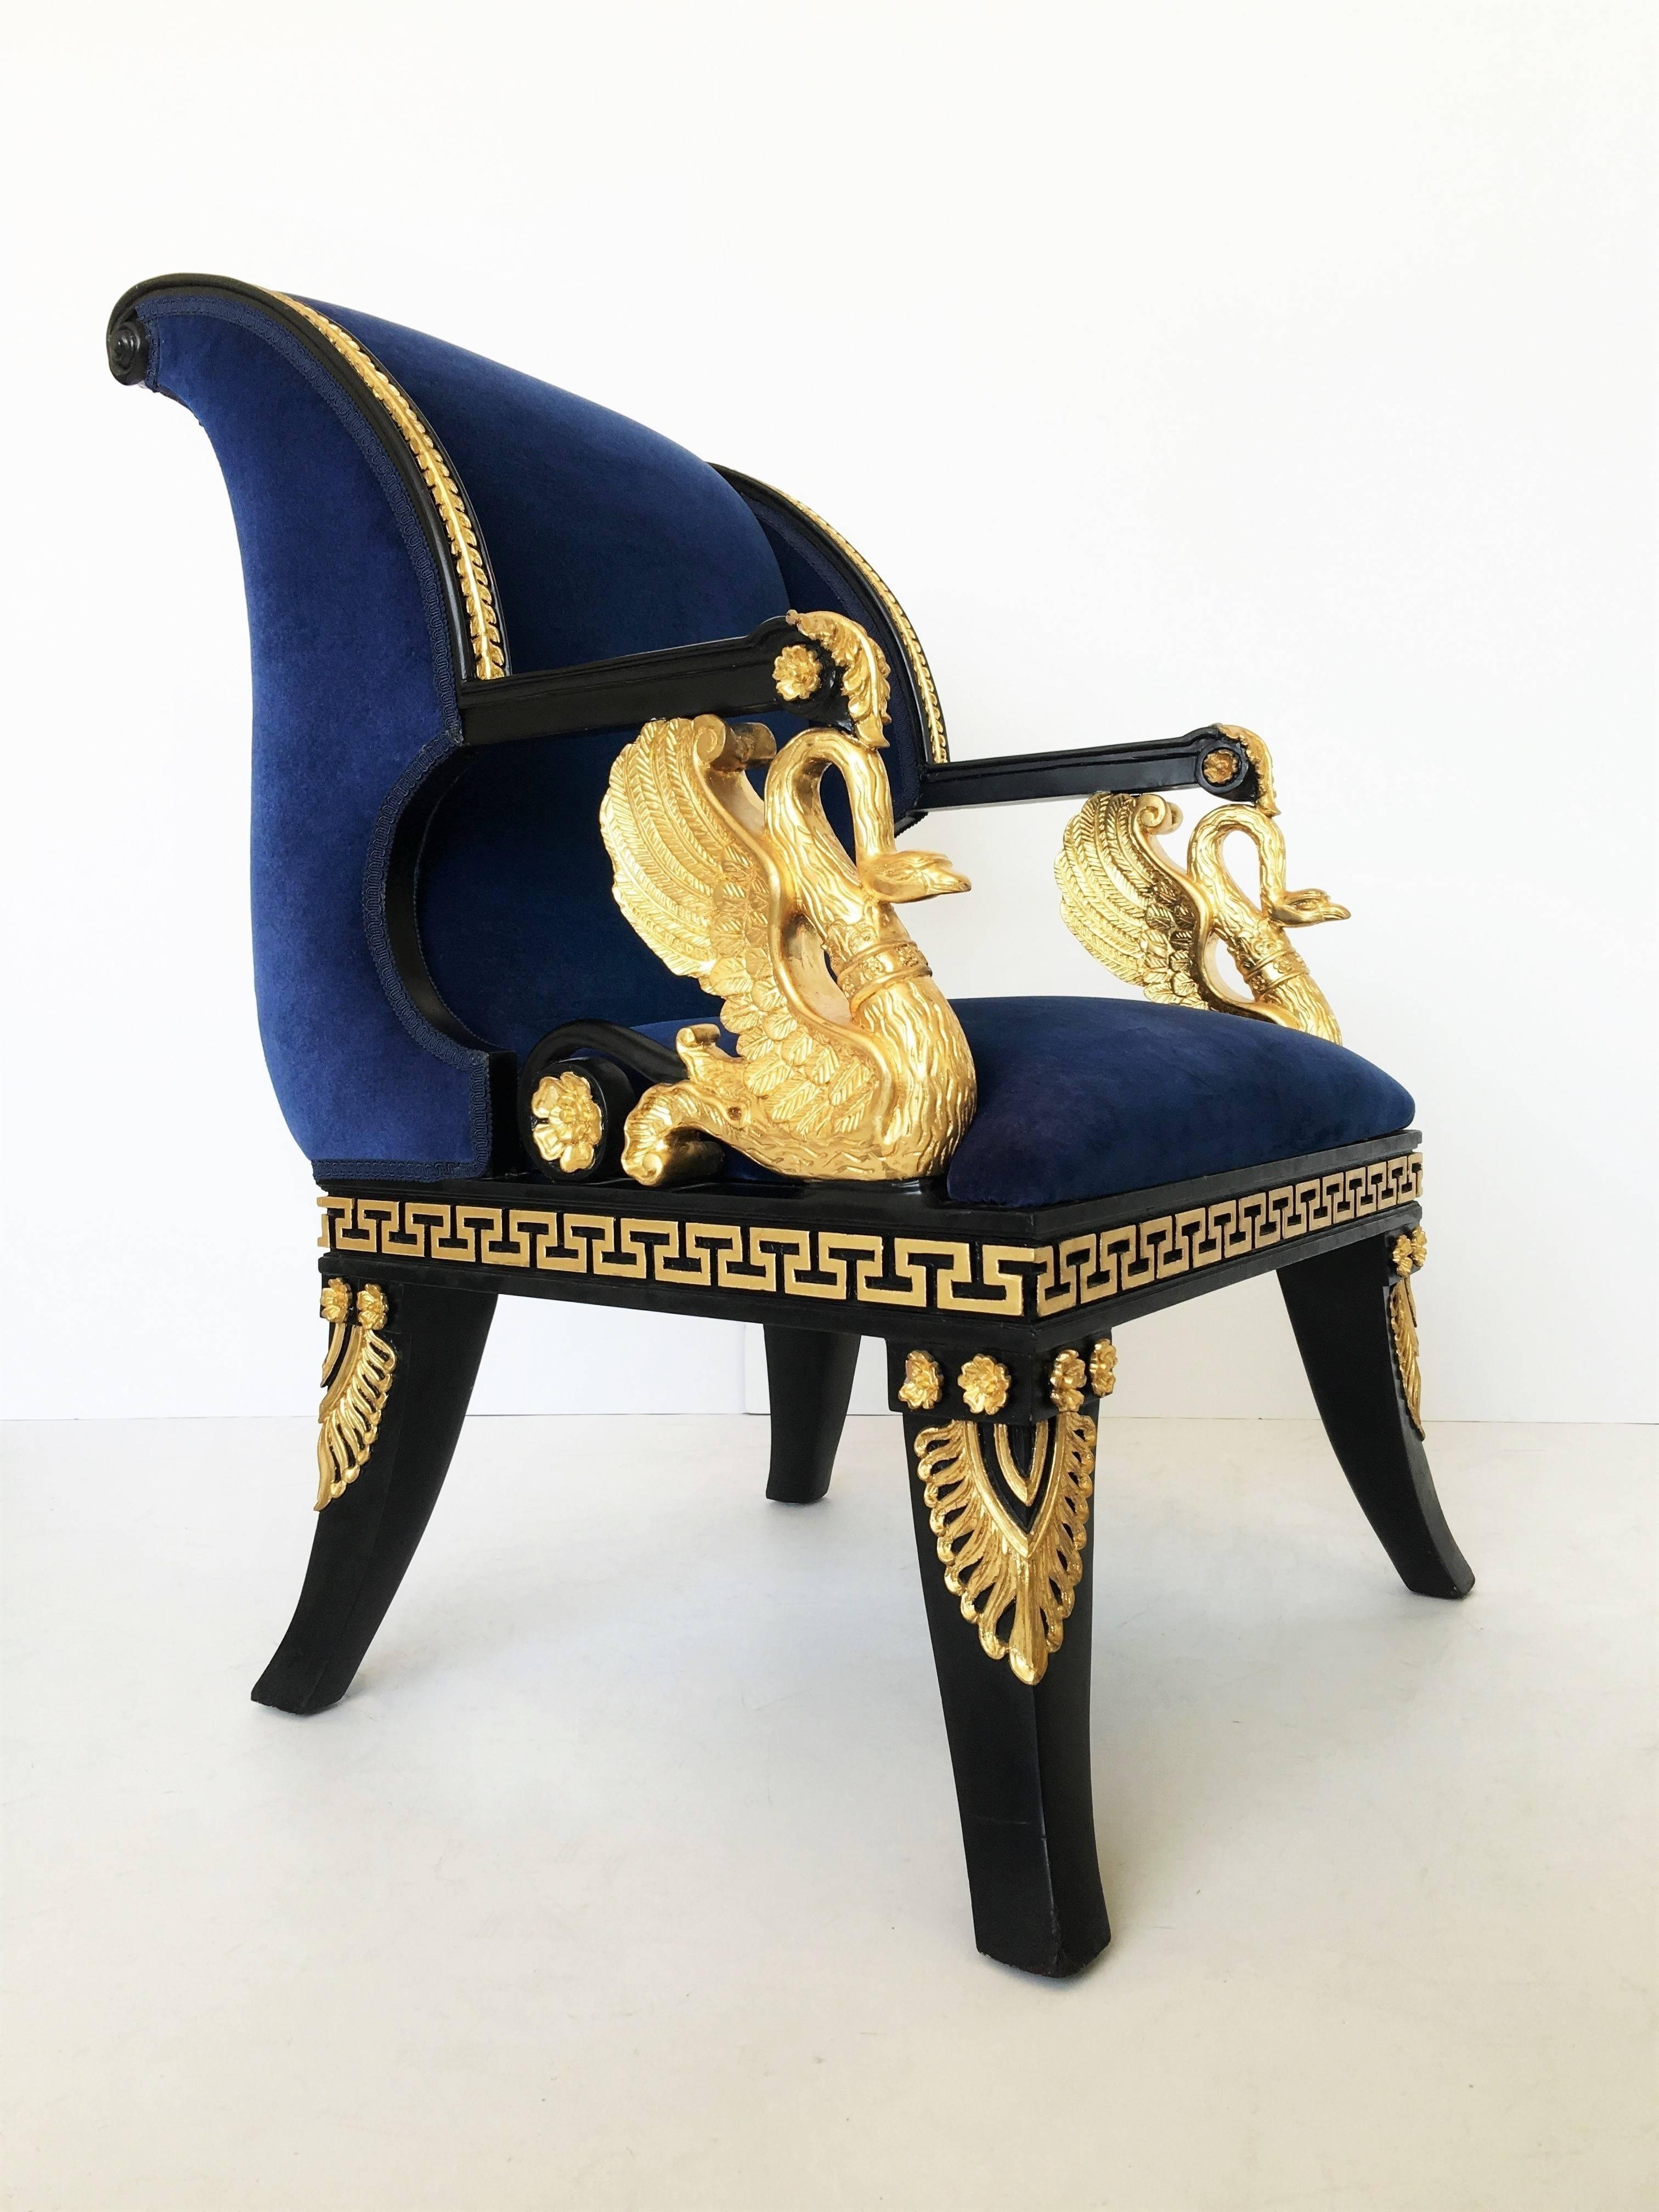 Neoclassic pair of lacquered and gilt carved wooden armrests raised on swan-shaped supports, the seat carved with rosettes and anthemion, raised on sabre legs.